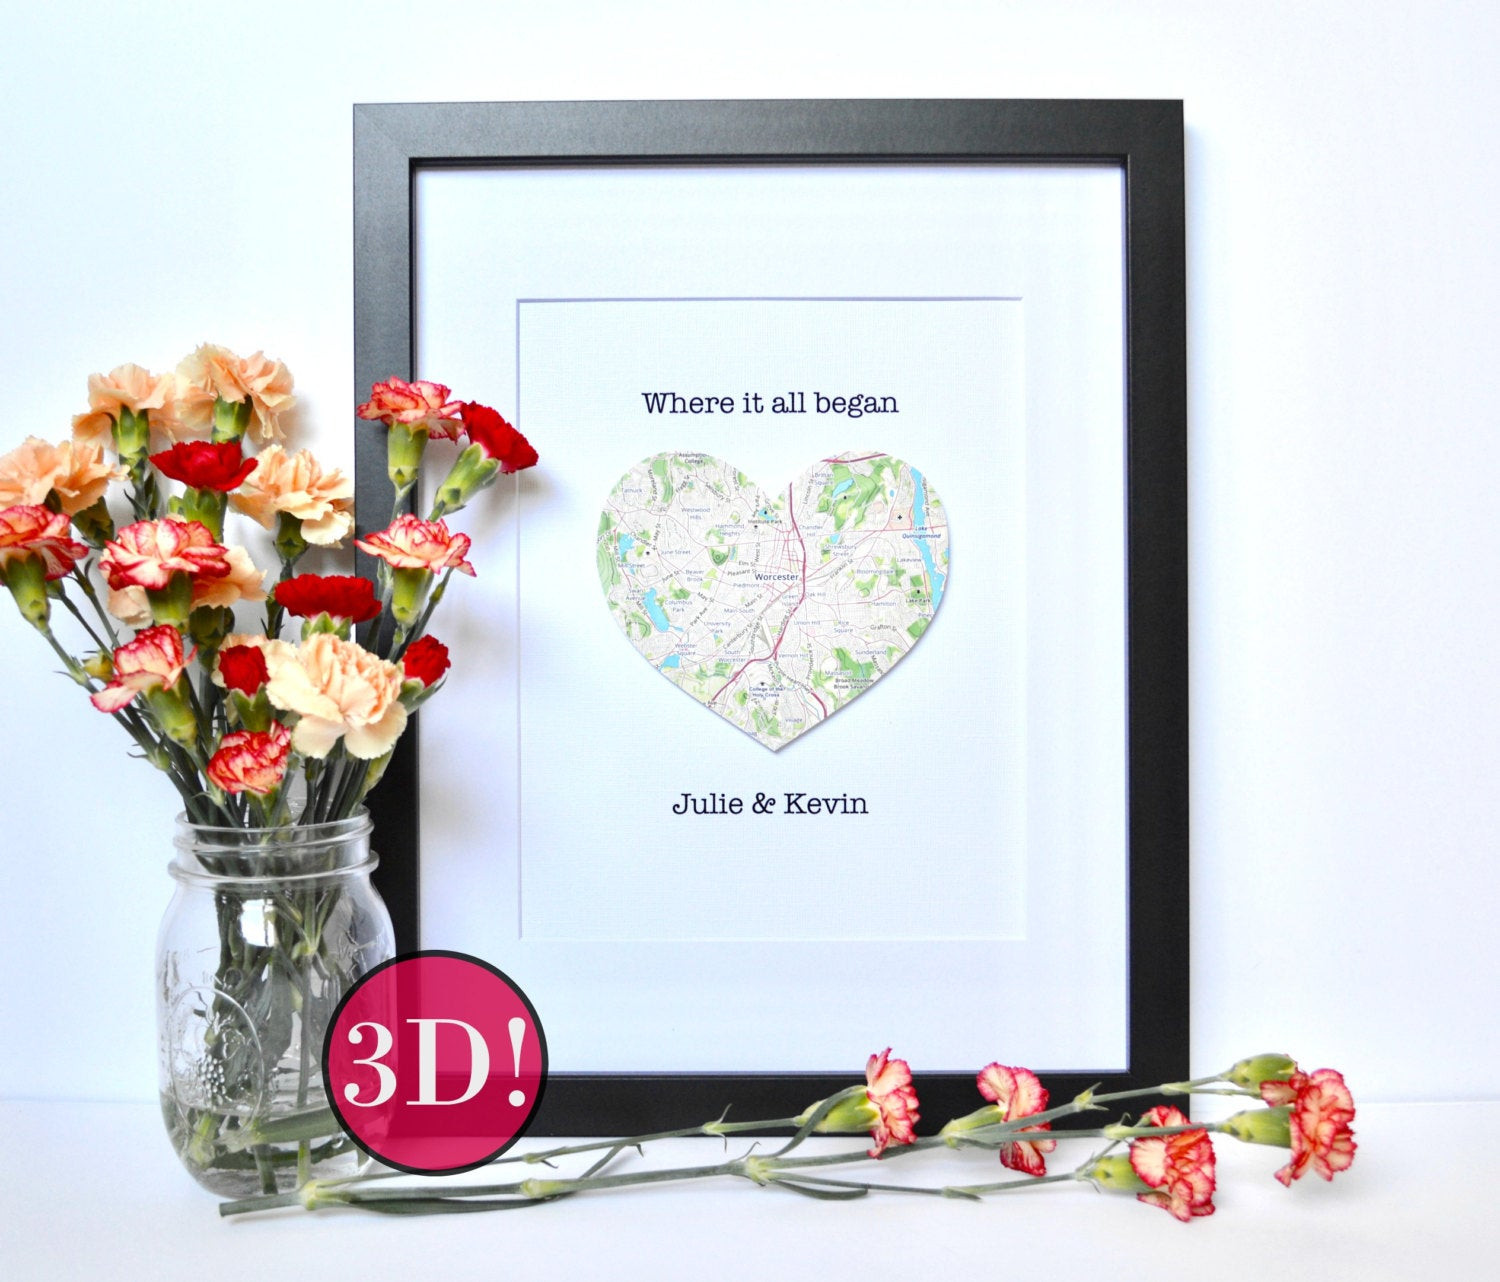 Couples Shower Gift Ideas
 engagement t ideas for couple Bridal shower by